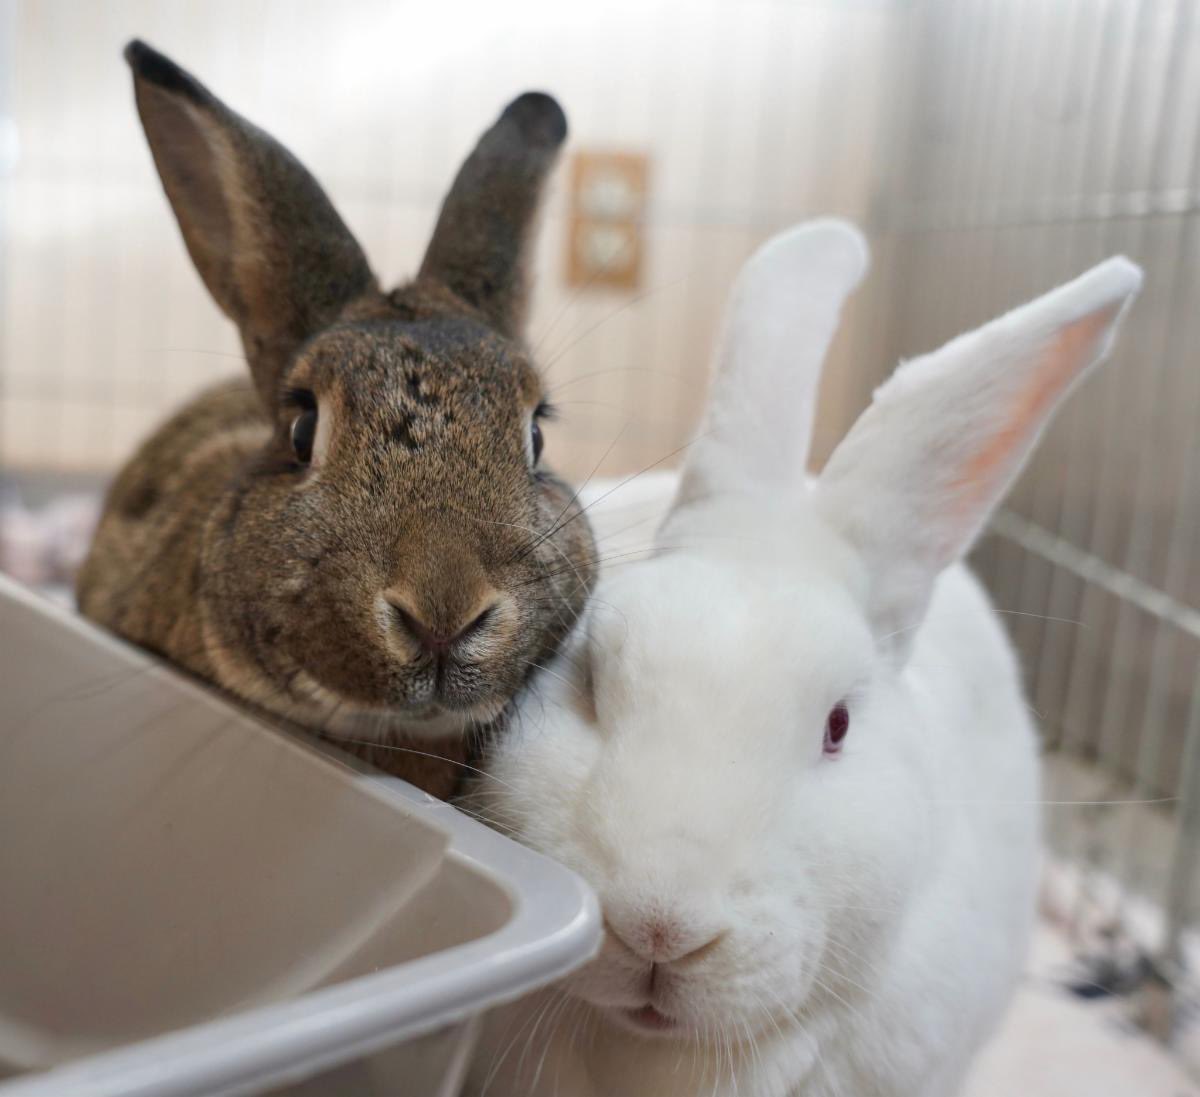 There are few things sweeter than a bonded pair of rabbits. 💘 Are you looking for a friend for your rabbit? San Francisco Bay Area residents can schedule an appointment for speed dating at HRS HQ in Richmond, California. 

See our adoptable rabbits at center.houserabbit.org